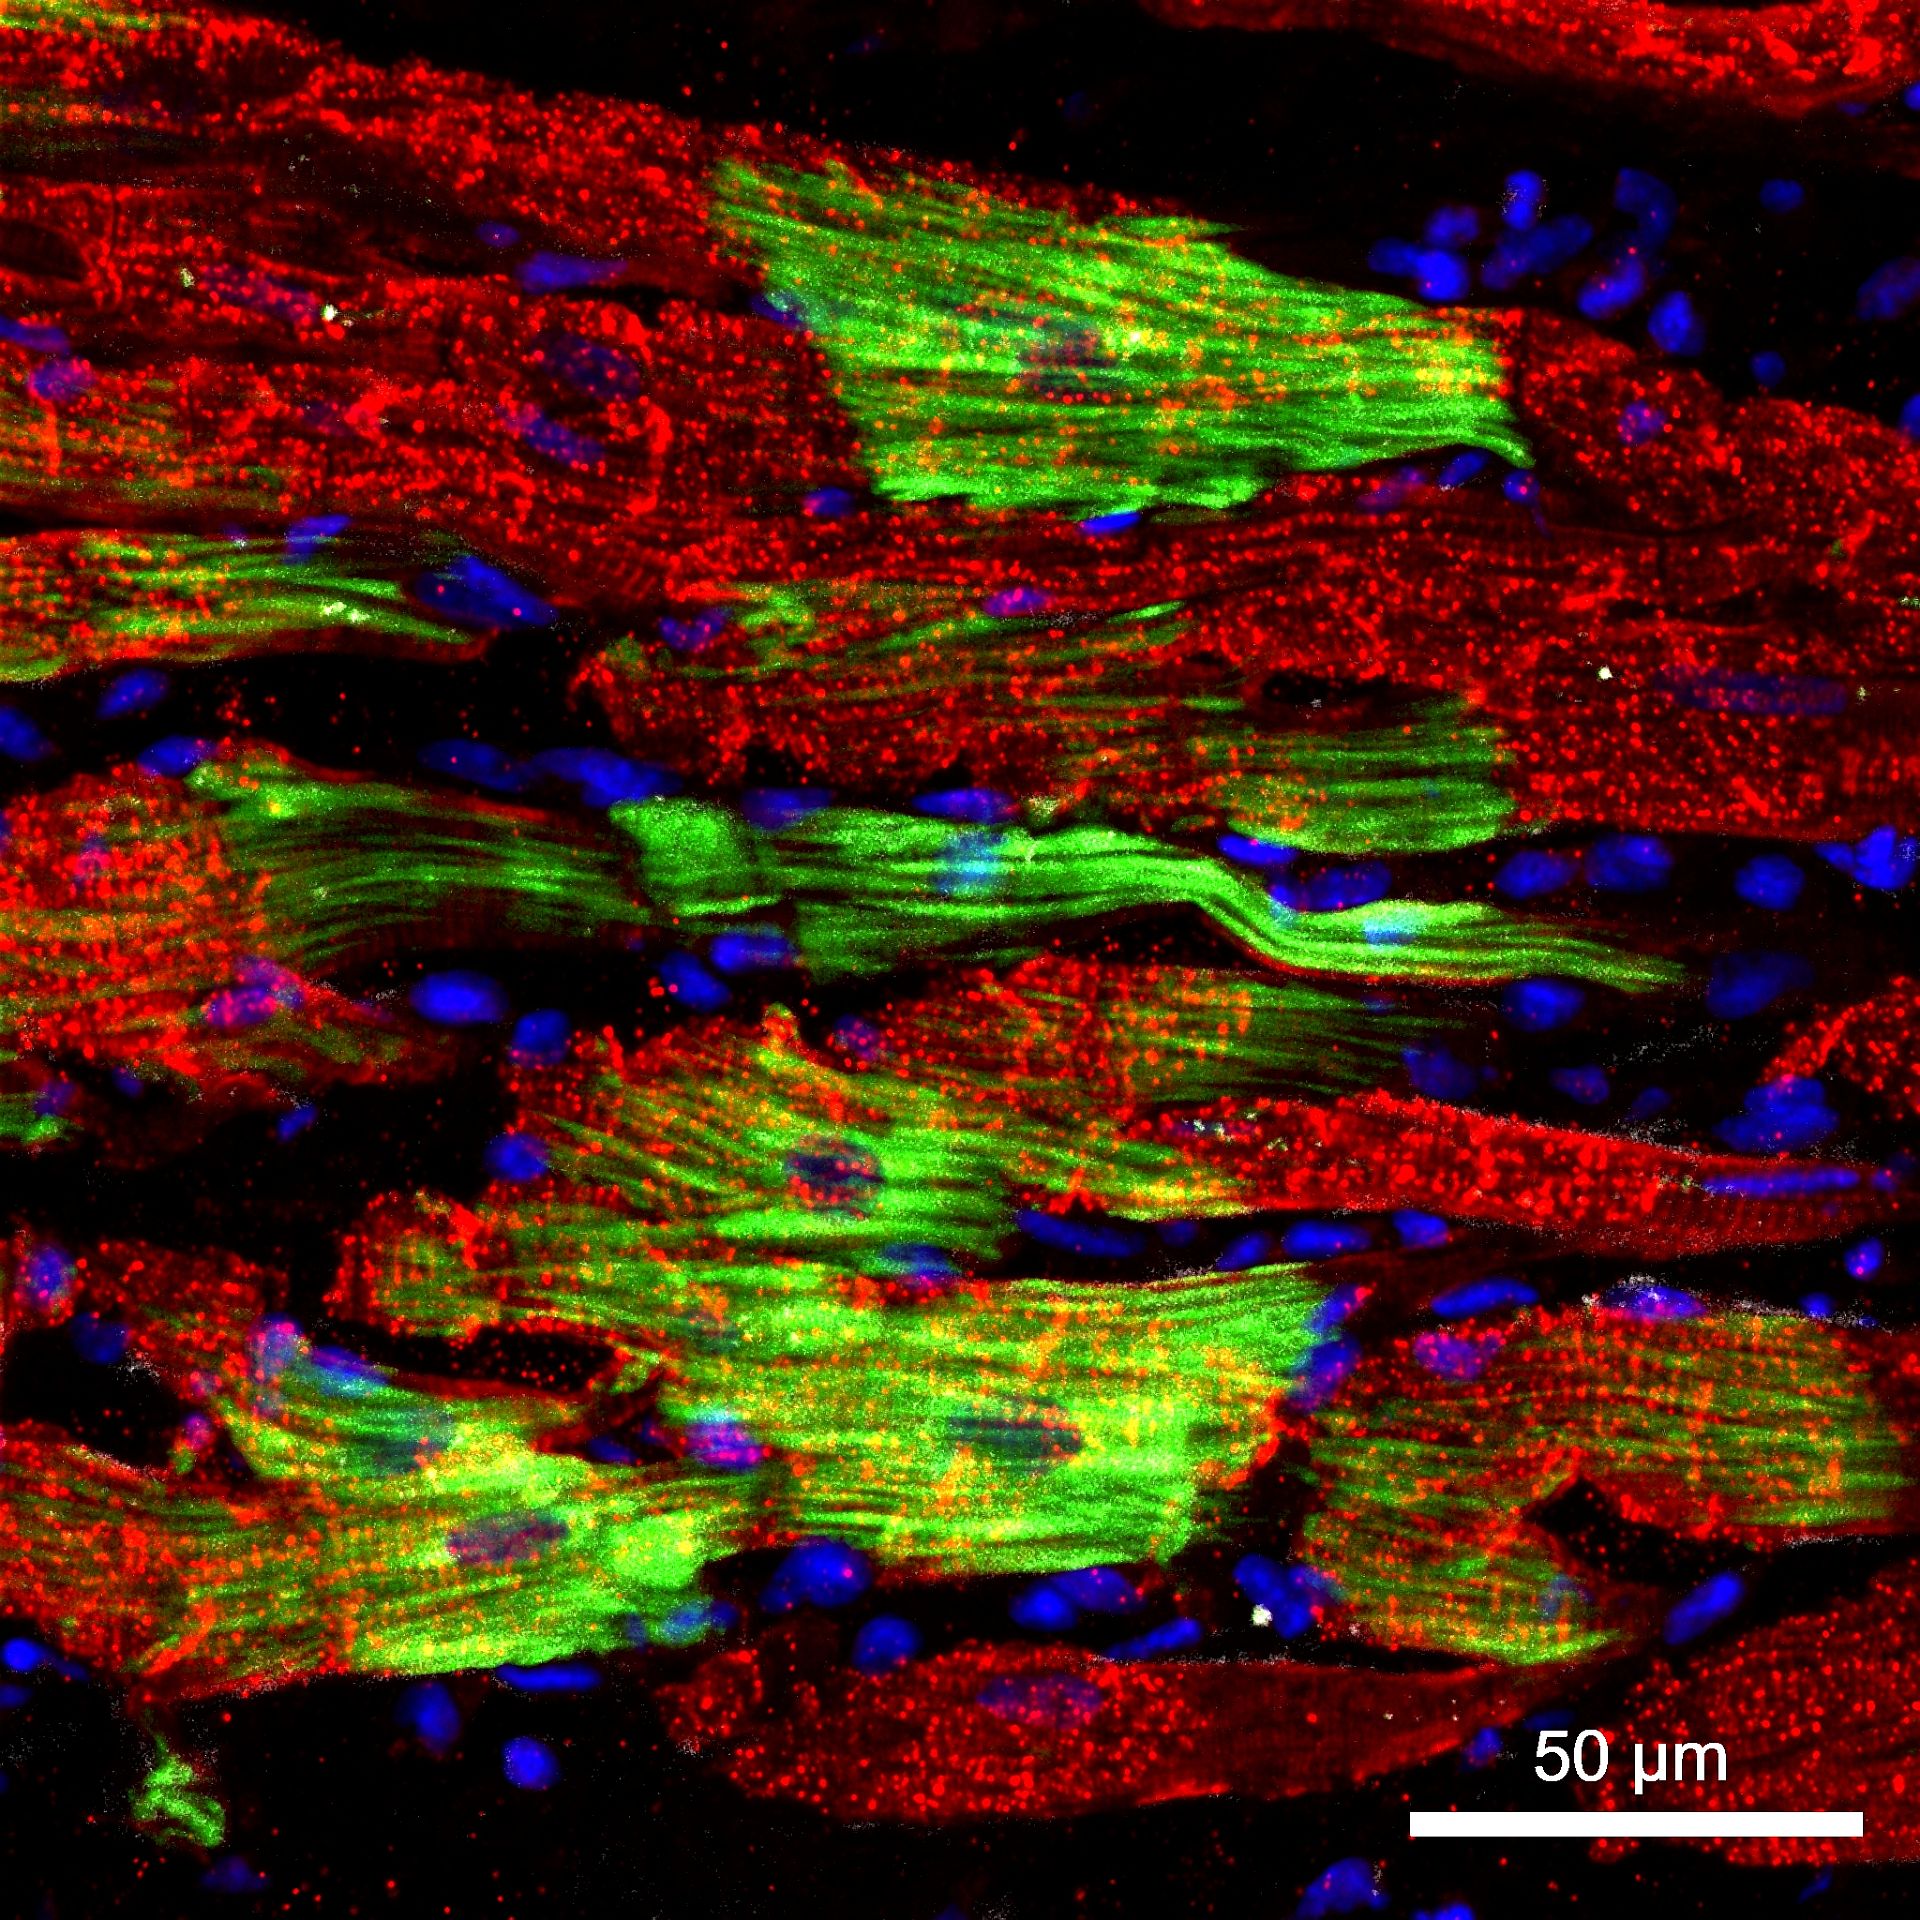 Representative immunostaining images with hiPSC-CM-GFP (green) and MYH6/7 gene (red). This figure indicated that the CM + PA group exhibited a much larger rod-shaped structure that resembled adult-like CMs. hMSC-PA improved the maturity of hiPSC-CMs